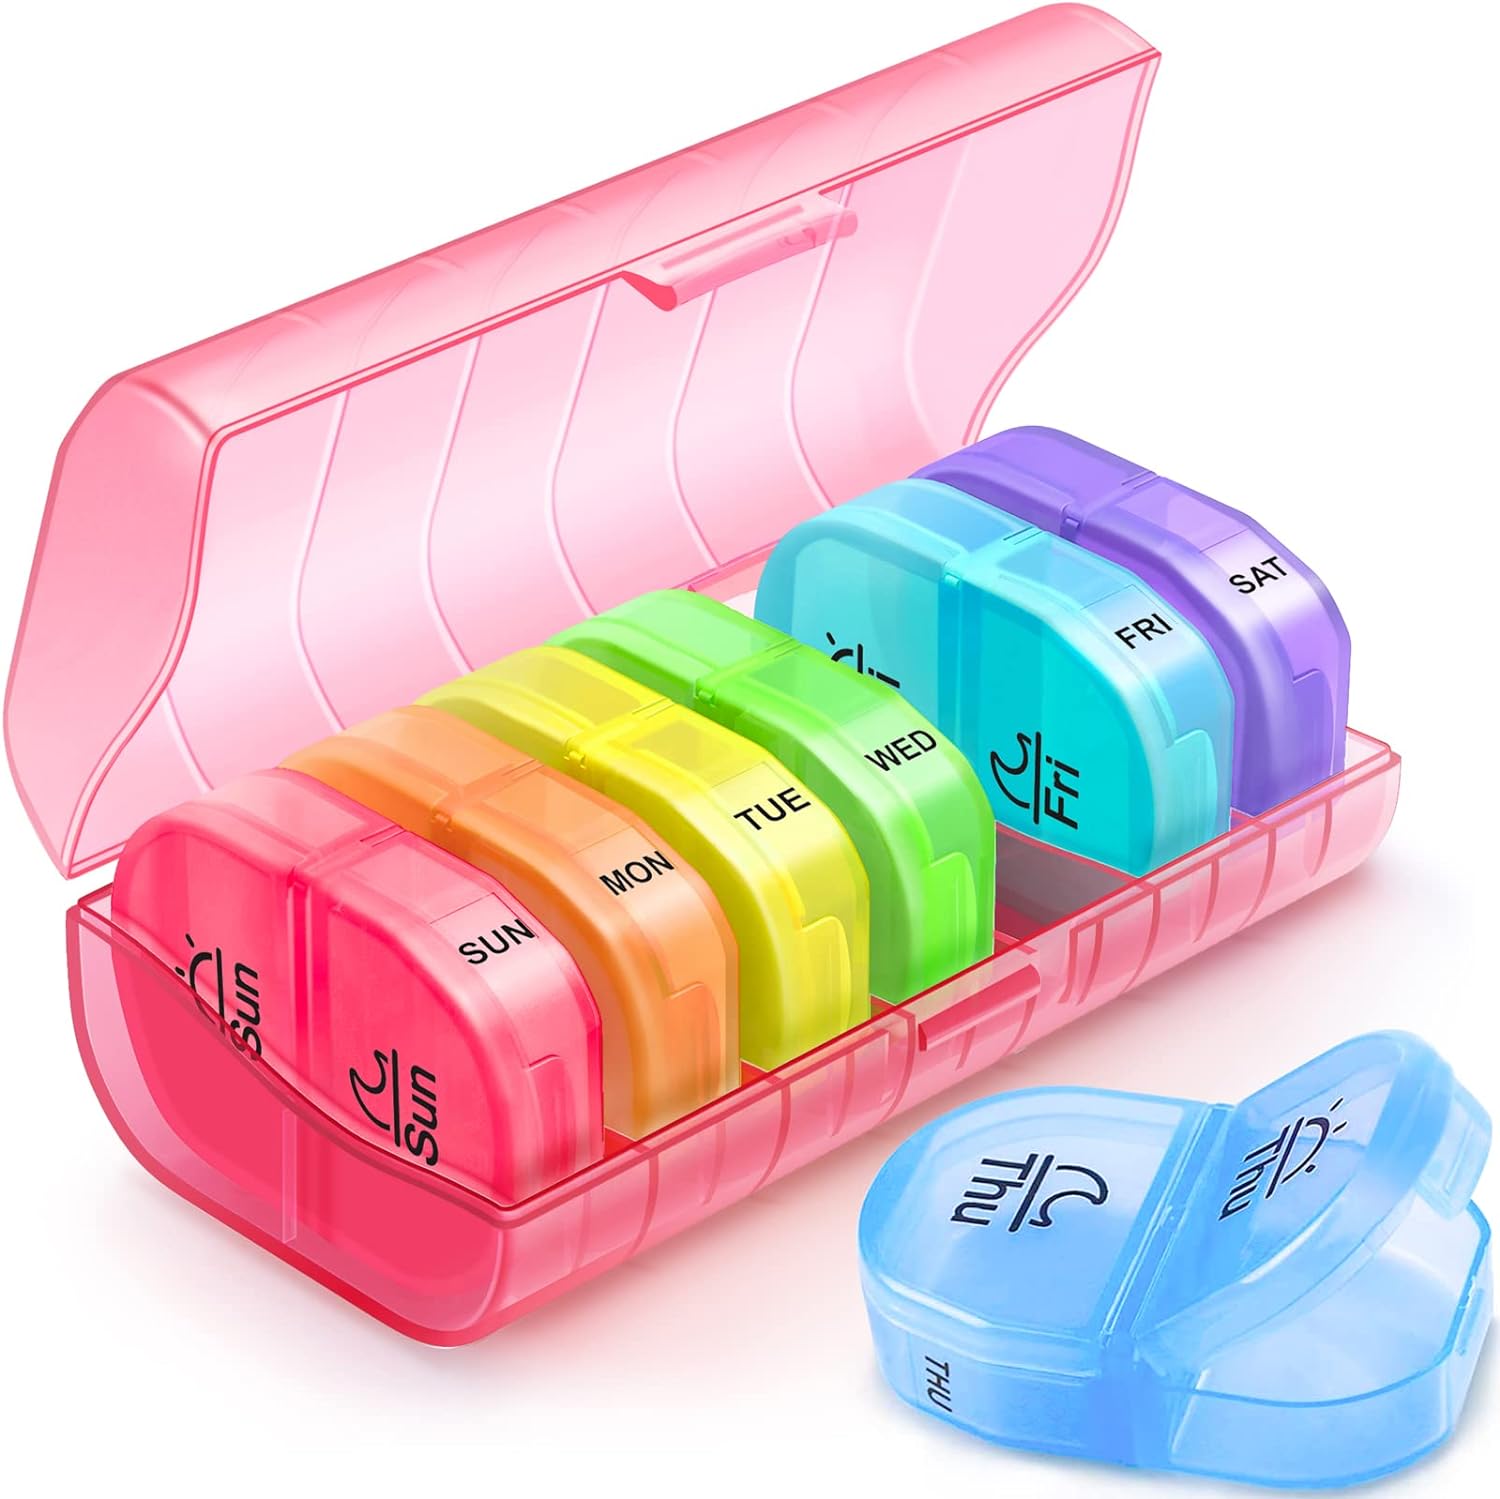 This pill container is great. Keeps everything organized for my morning and evening meds. I take 10 pills in the morning and it holds all with room to spare. Not child safe so make sure to keep out of reach. Sturdy, holds up well in luggage or handbag.